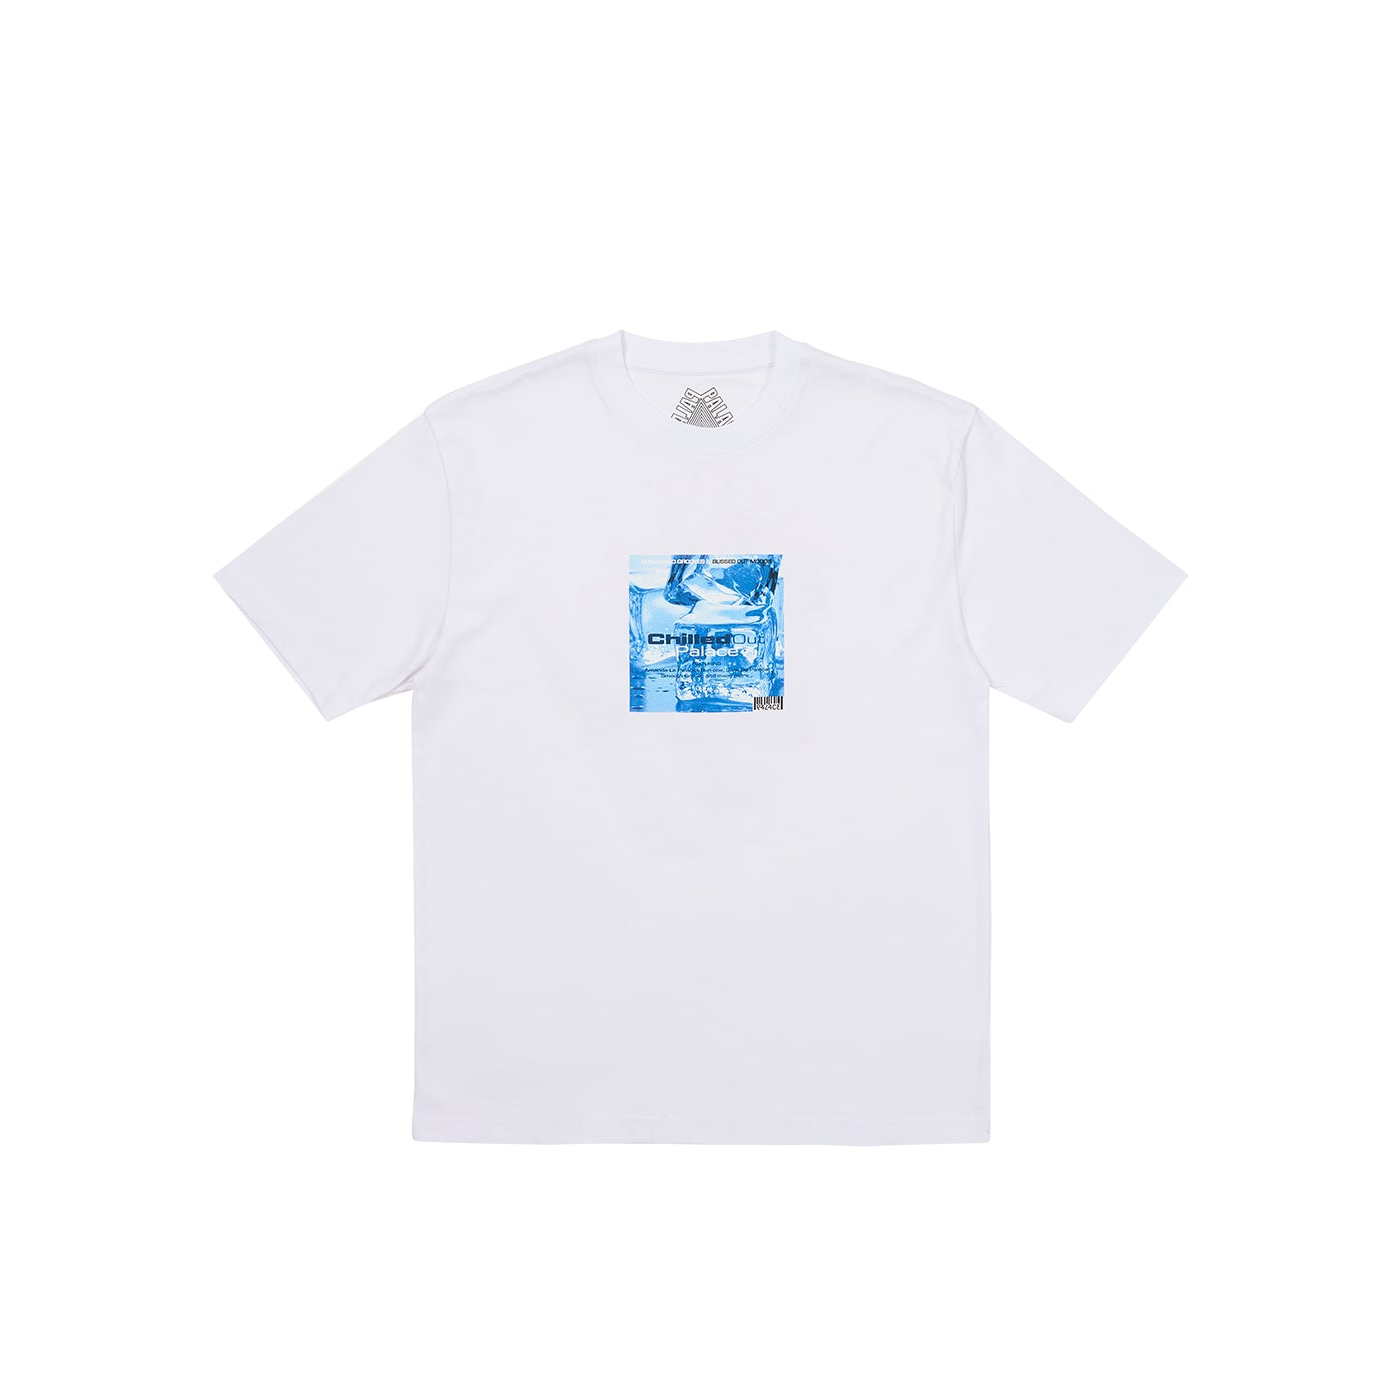 Thumbnail BLISSED OUT T-SHIRT WHITE one color